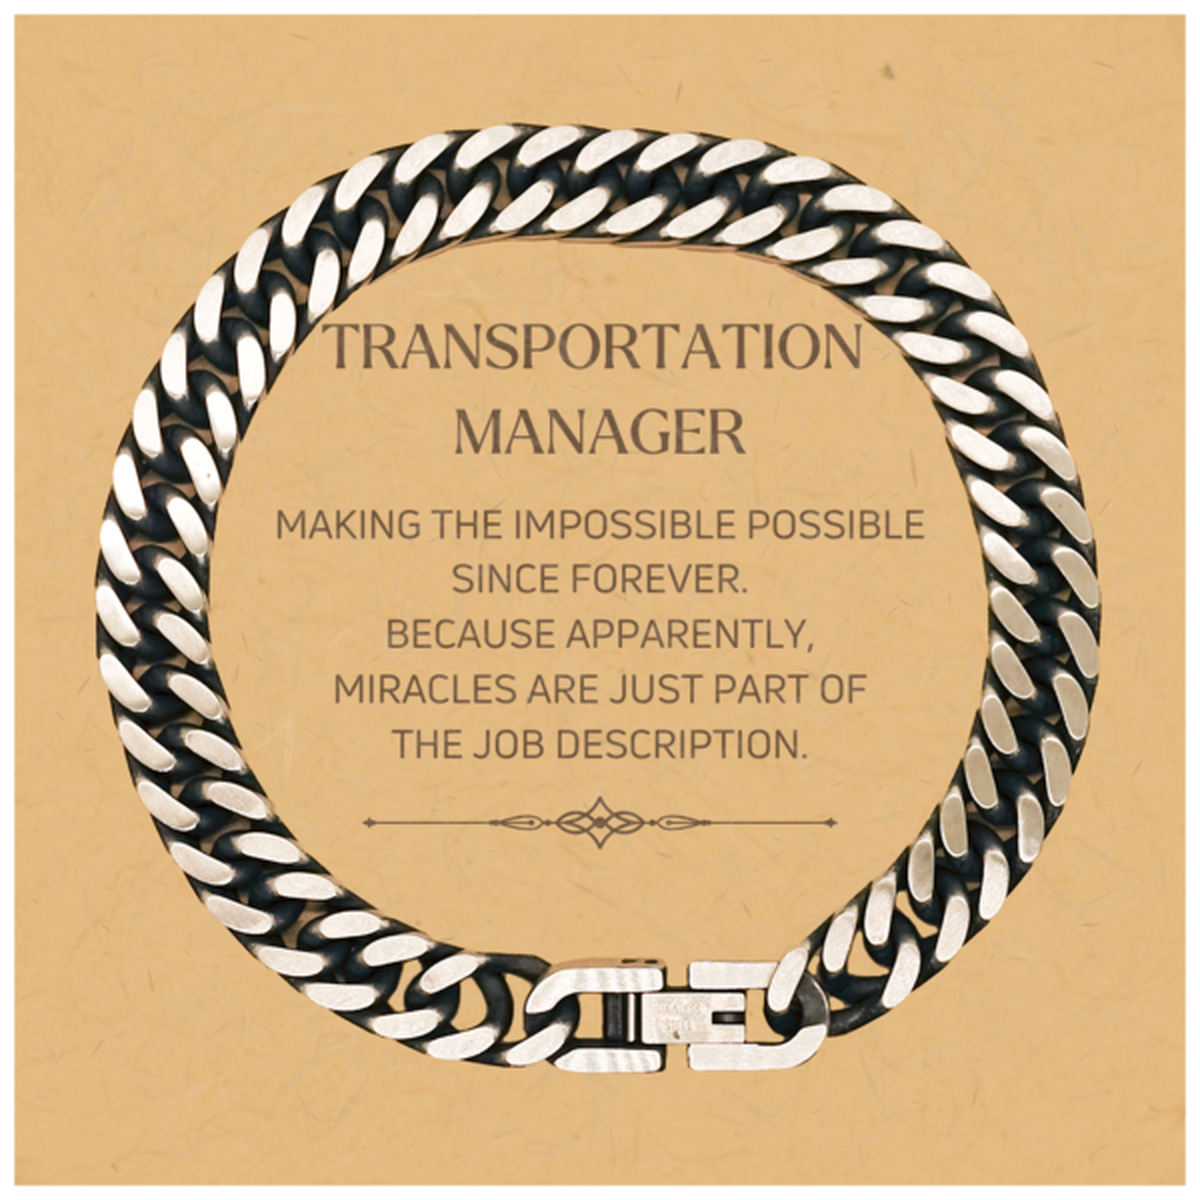 Funny Transportation Manager Gifts, Miracles are just part of the job description, Inspirational Birthday Christmas Cuban Link Chain Bracelet For Transportation Manager, Men, Women, Coworkers, Friends, Boss